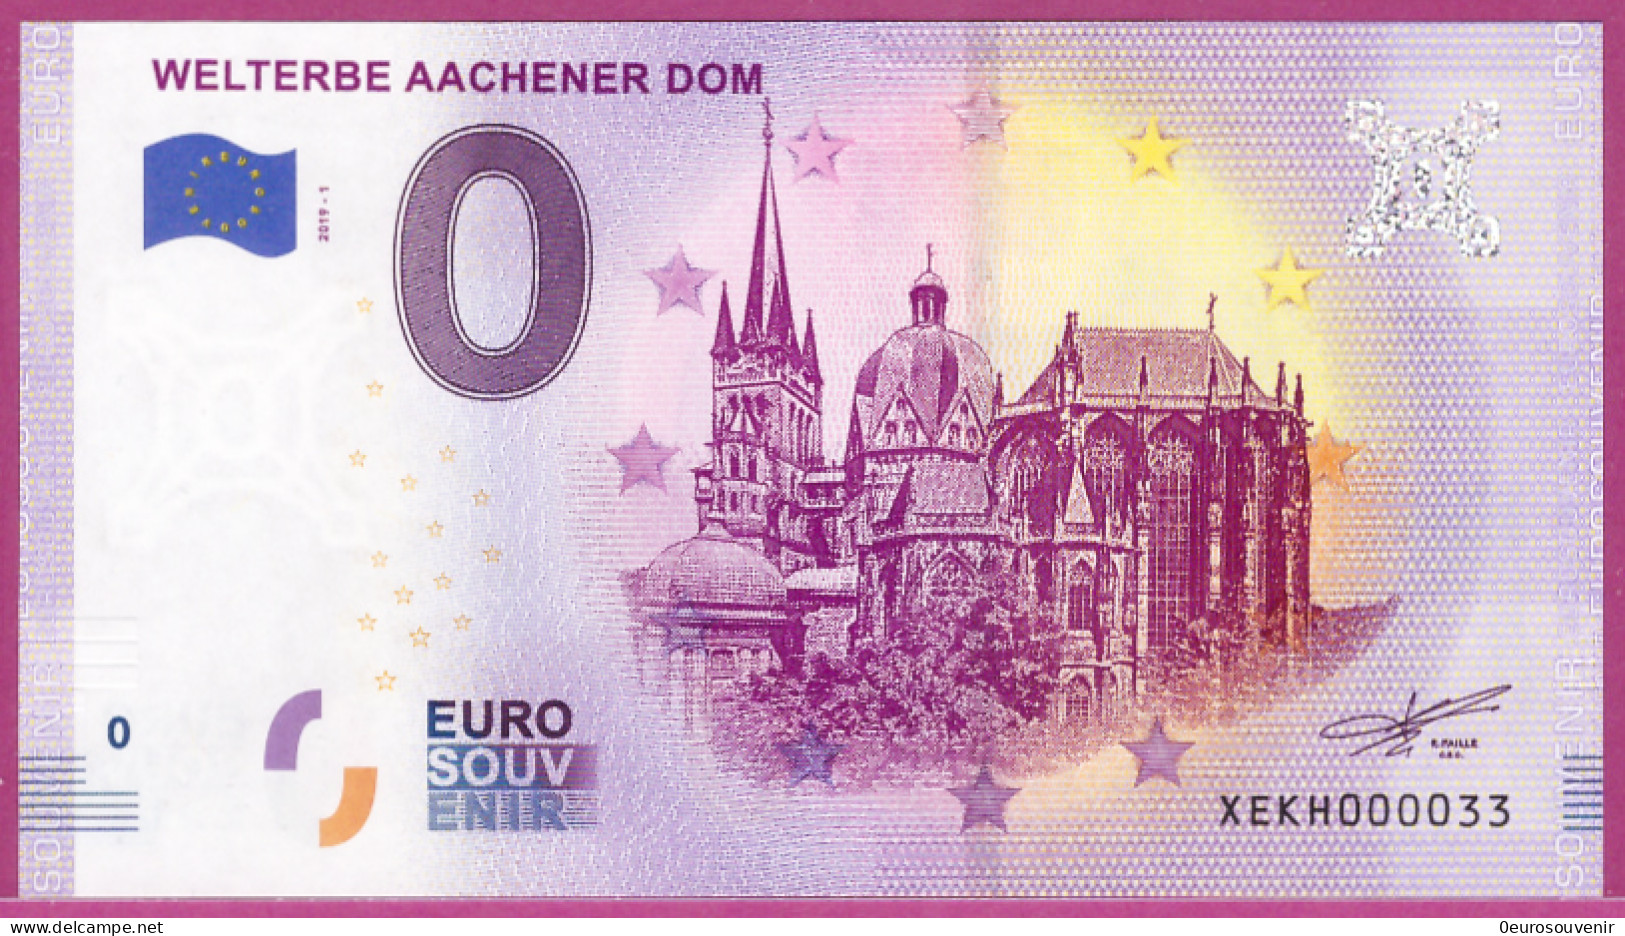 0-Euro XEKH 2019-1 # 0033 ! WELTERBE AACHENER DOM - Private Proofs / Unofficial